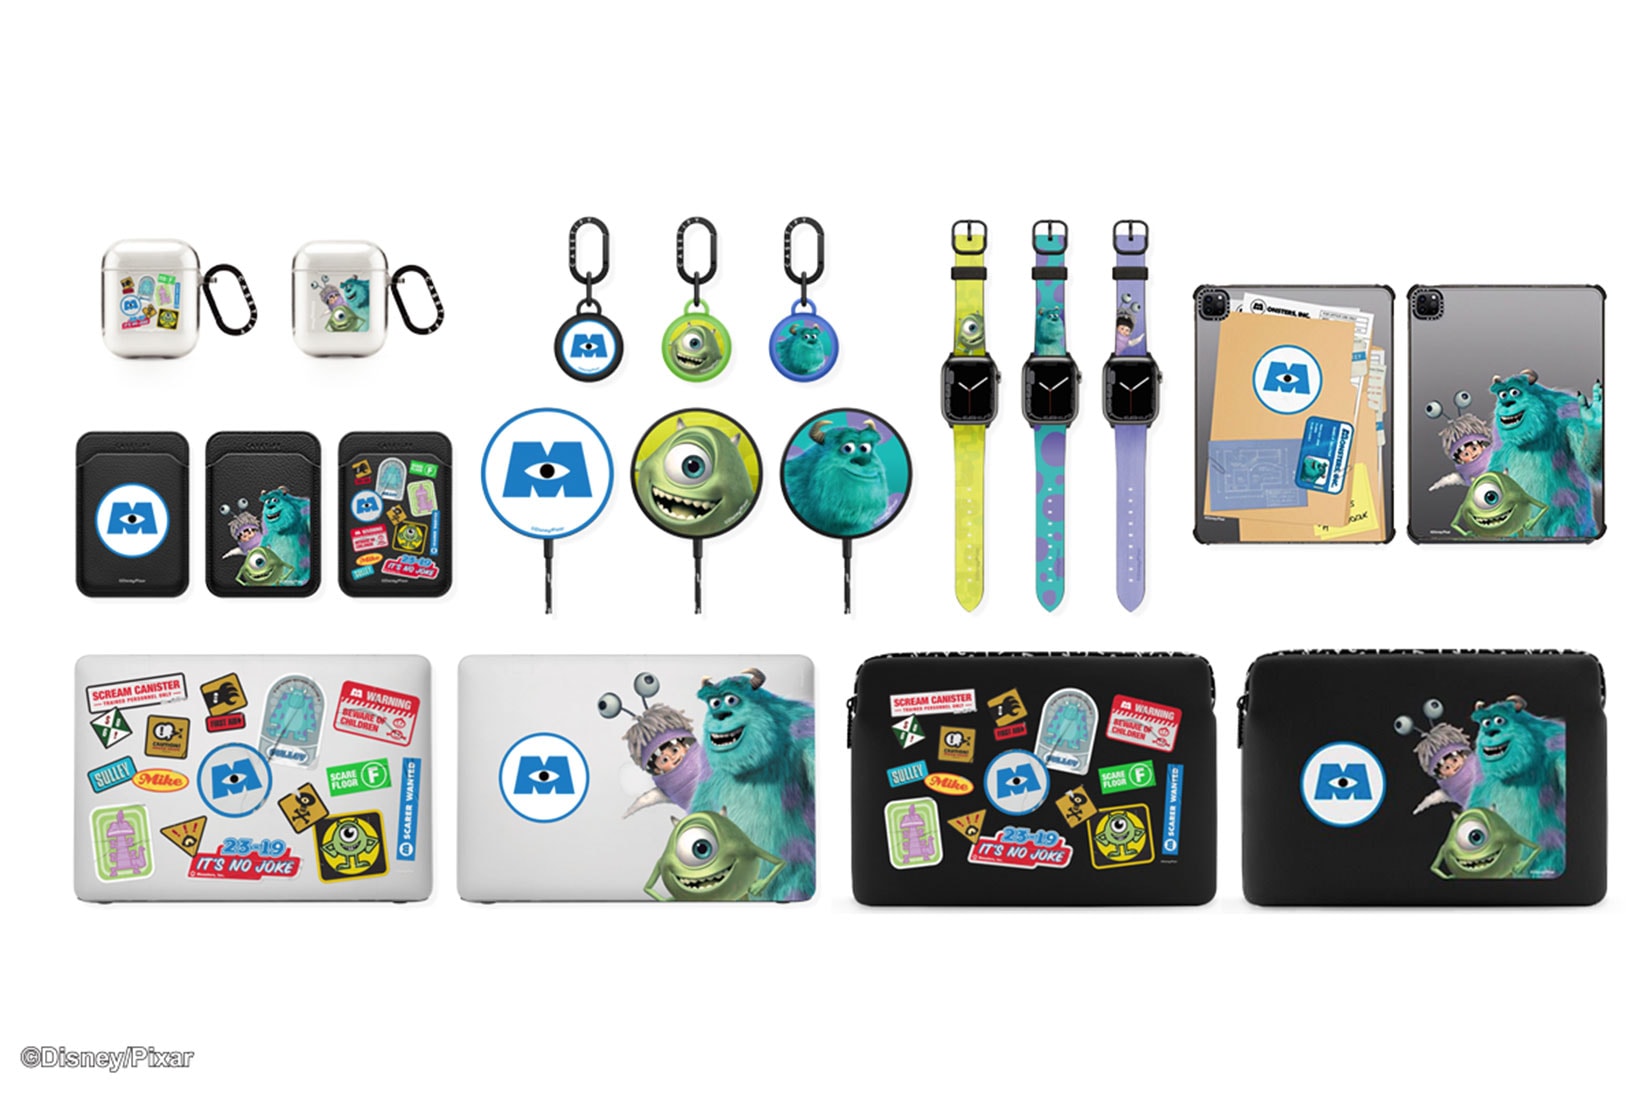 Monsters Inc Casetify Pixar Disney Collaboration iPhone Cases Apple AirPods Release Price